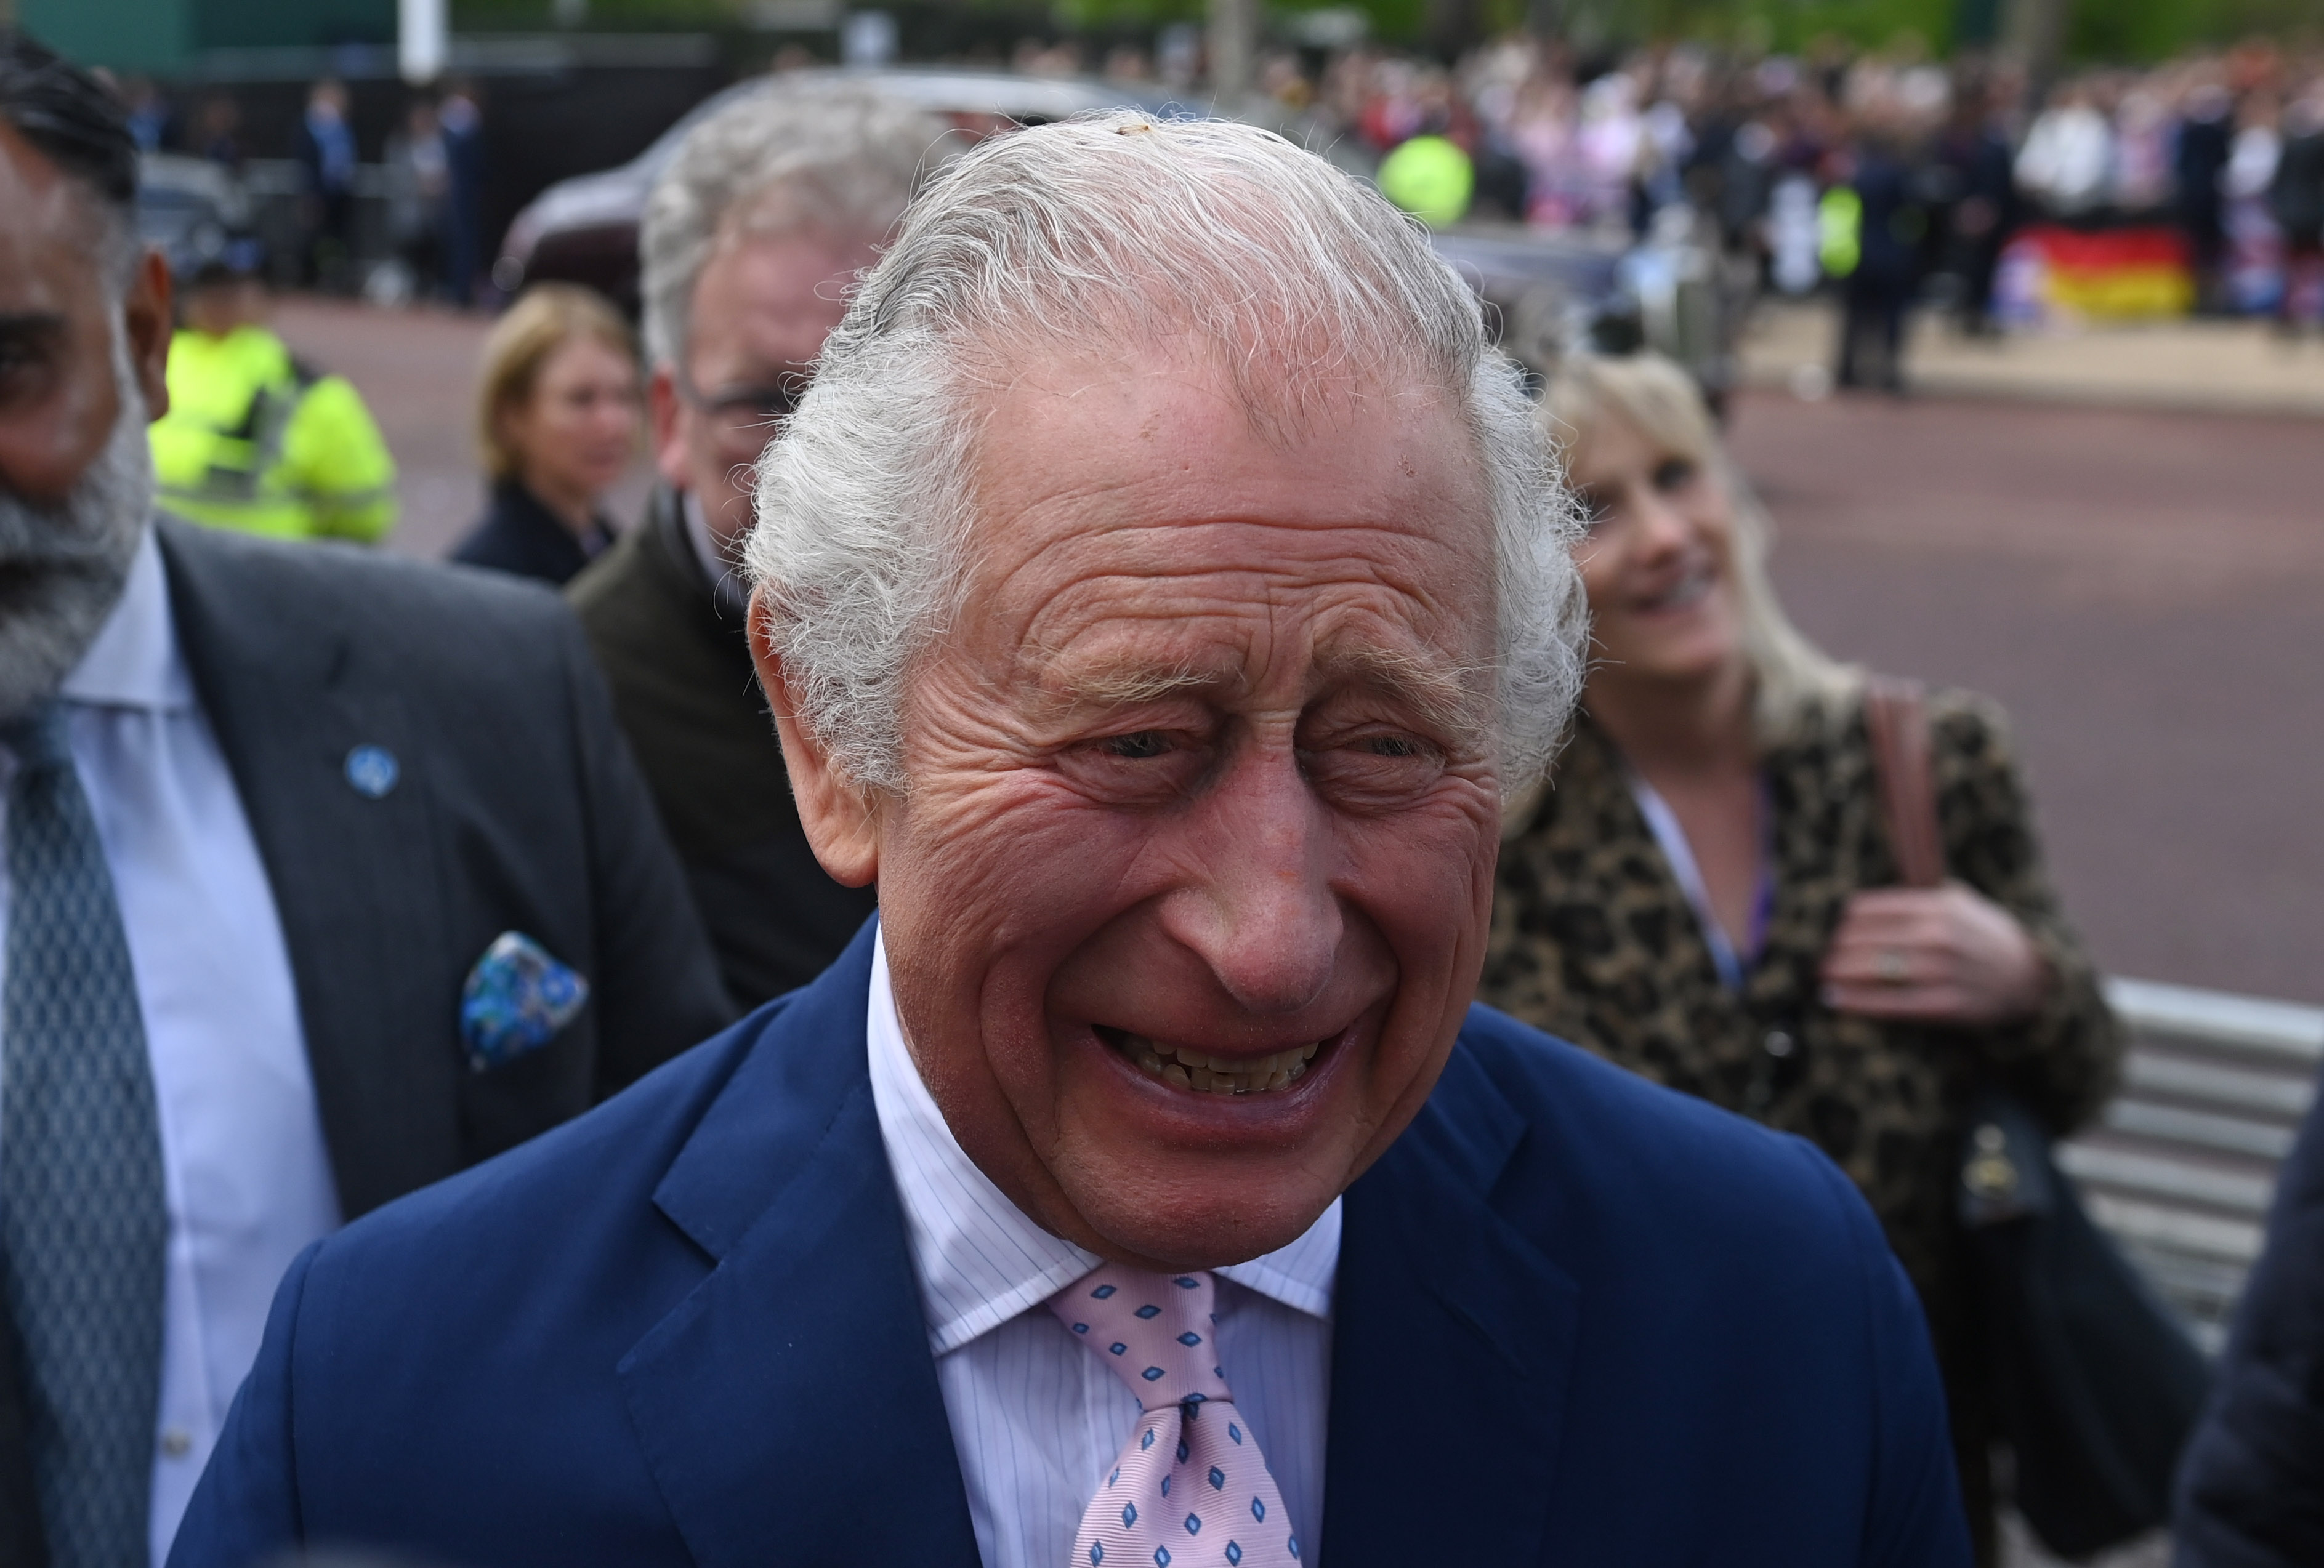 <p>King Charles III was all smiles as he greeted well-wishers along the Mall in London during a surprise walkabout on May 5, 2023 -- one day ahead of his coronation.</p>